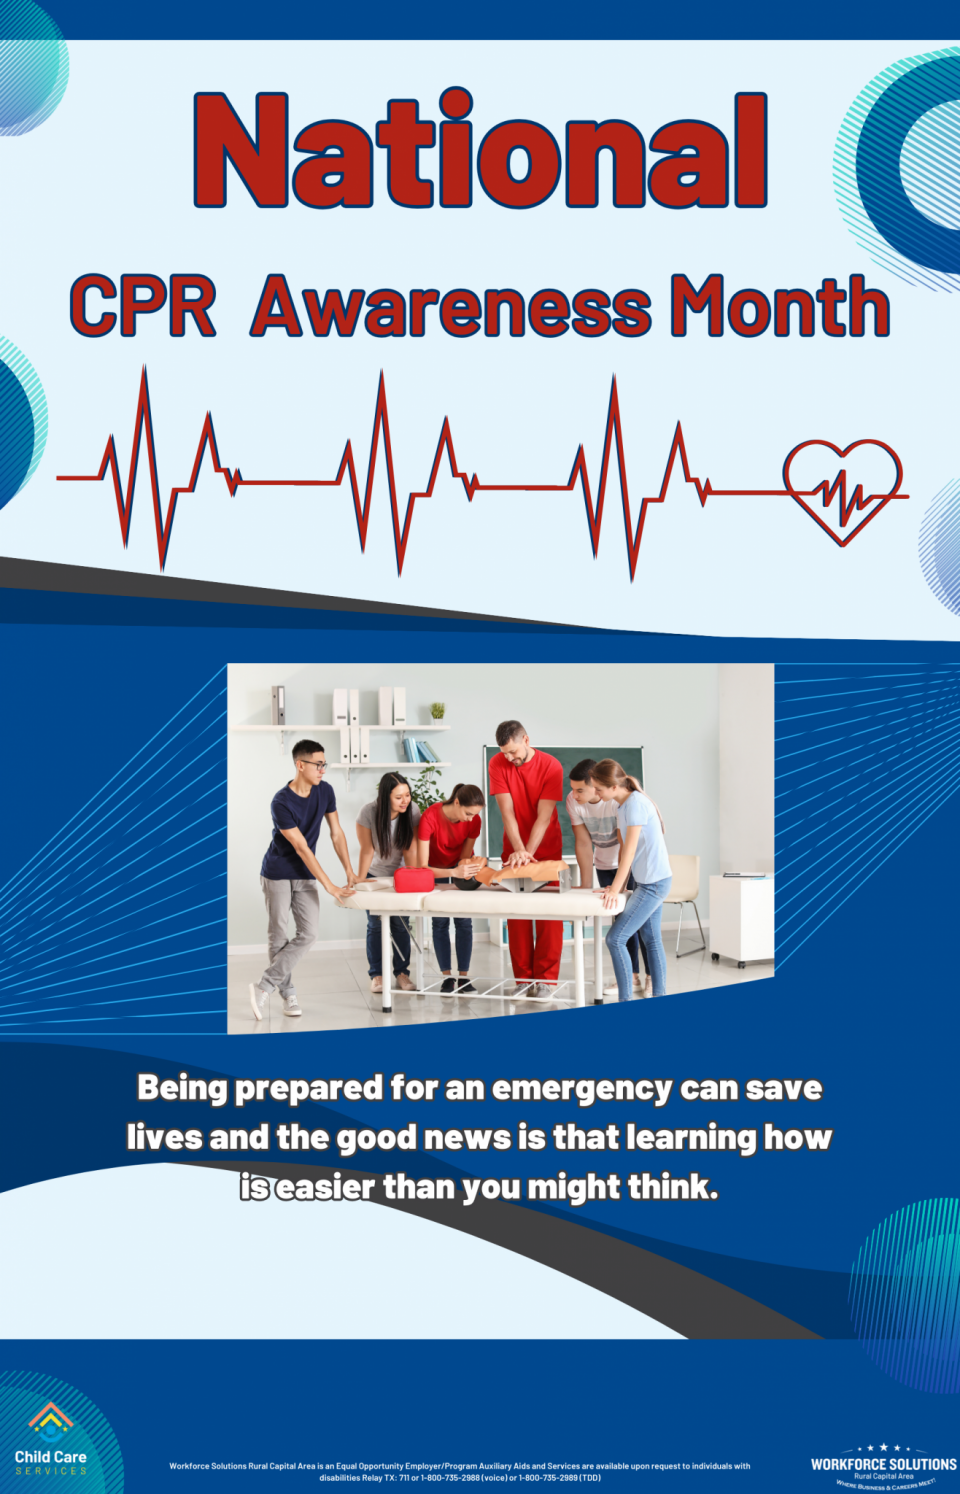 CPR Awareness Month: Learning CPR and First aid Enables Individuals to Become Valuable Members of Their Communities.